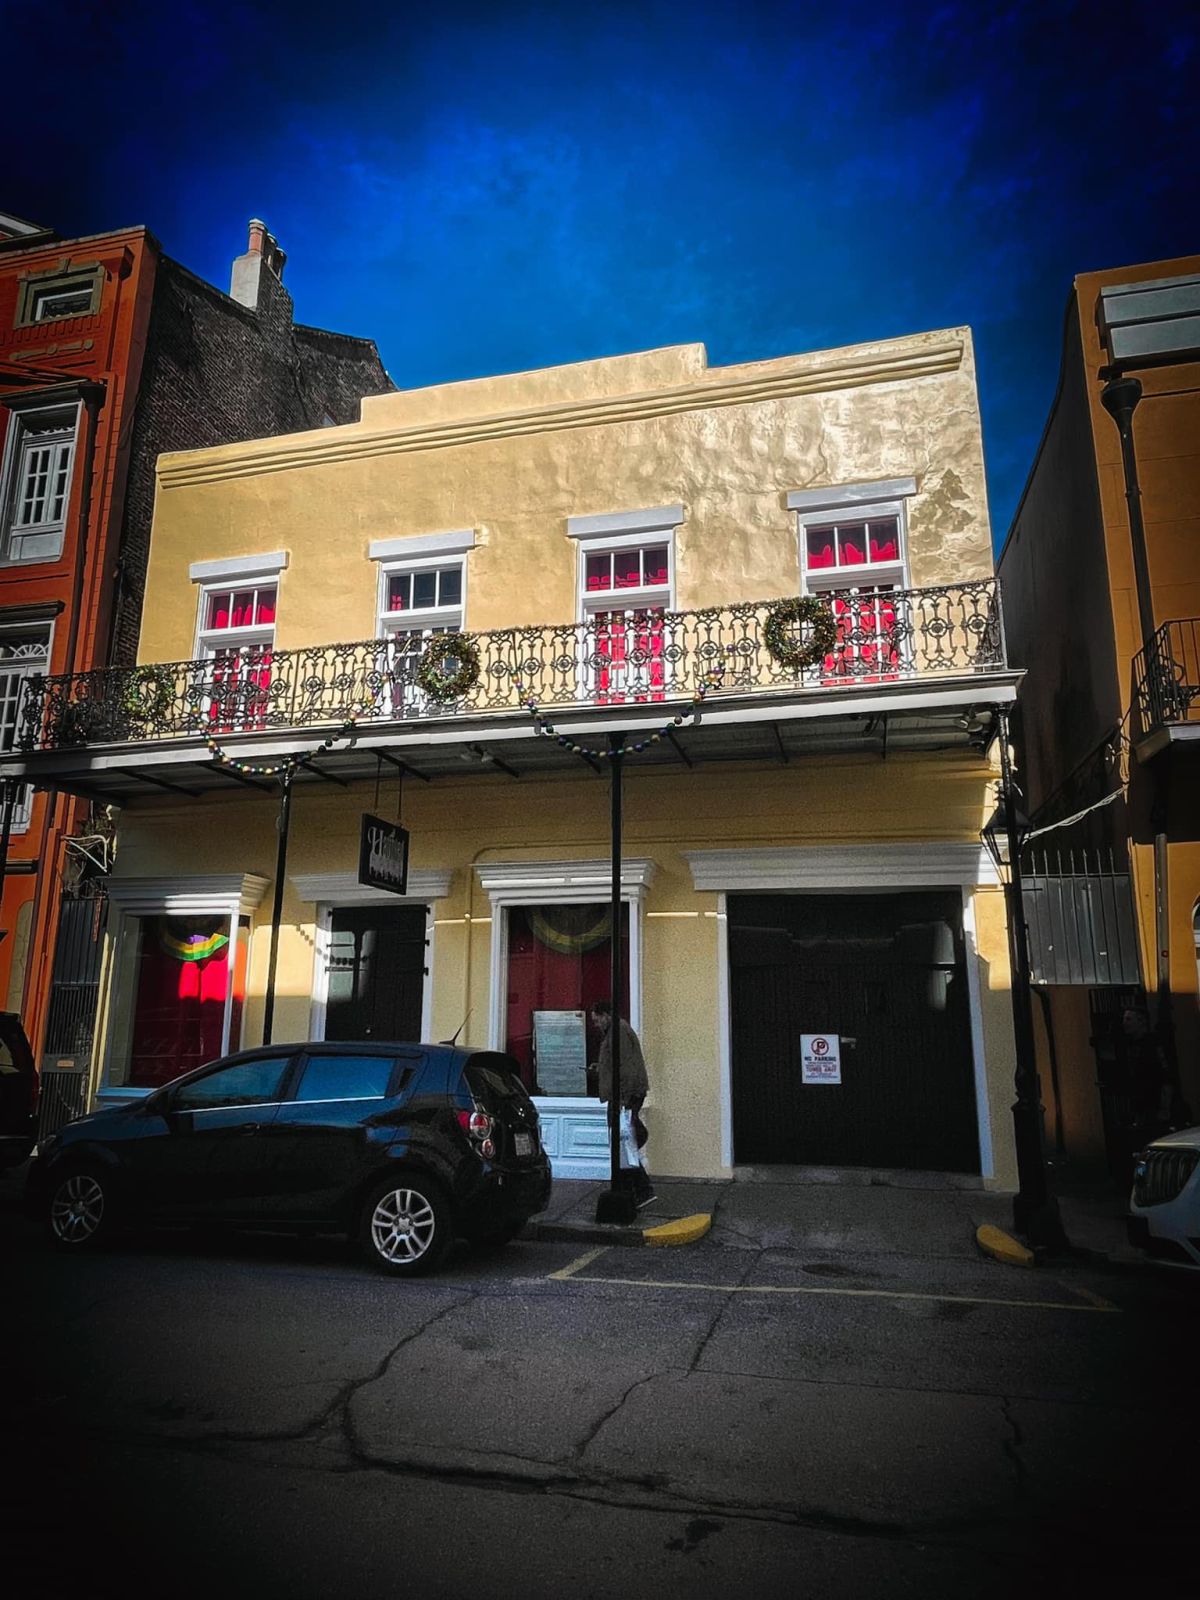 Haunted Hotel New Orleans